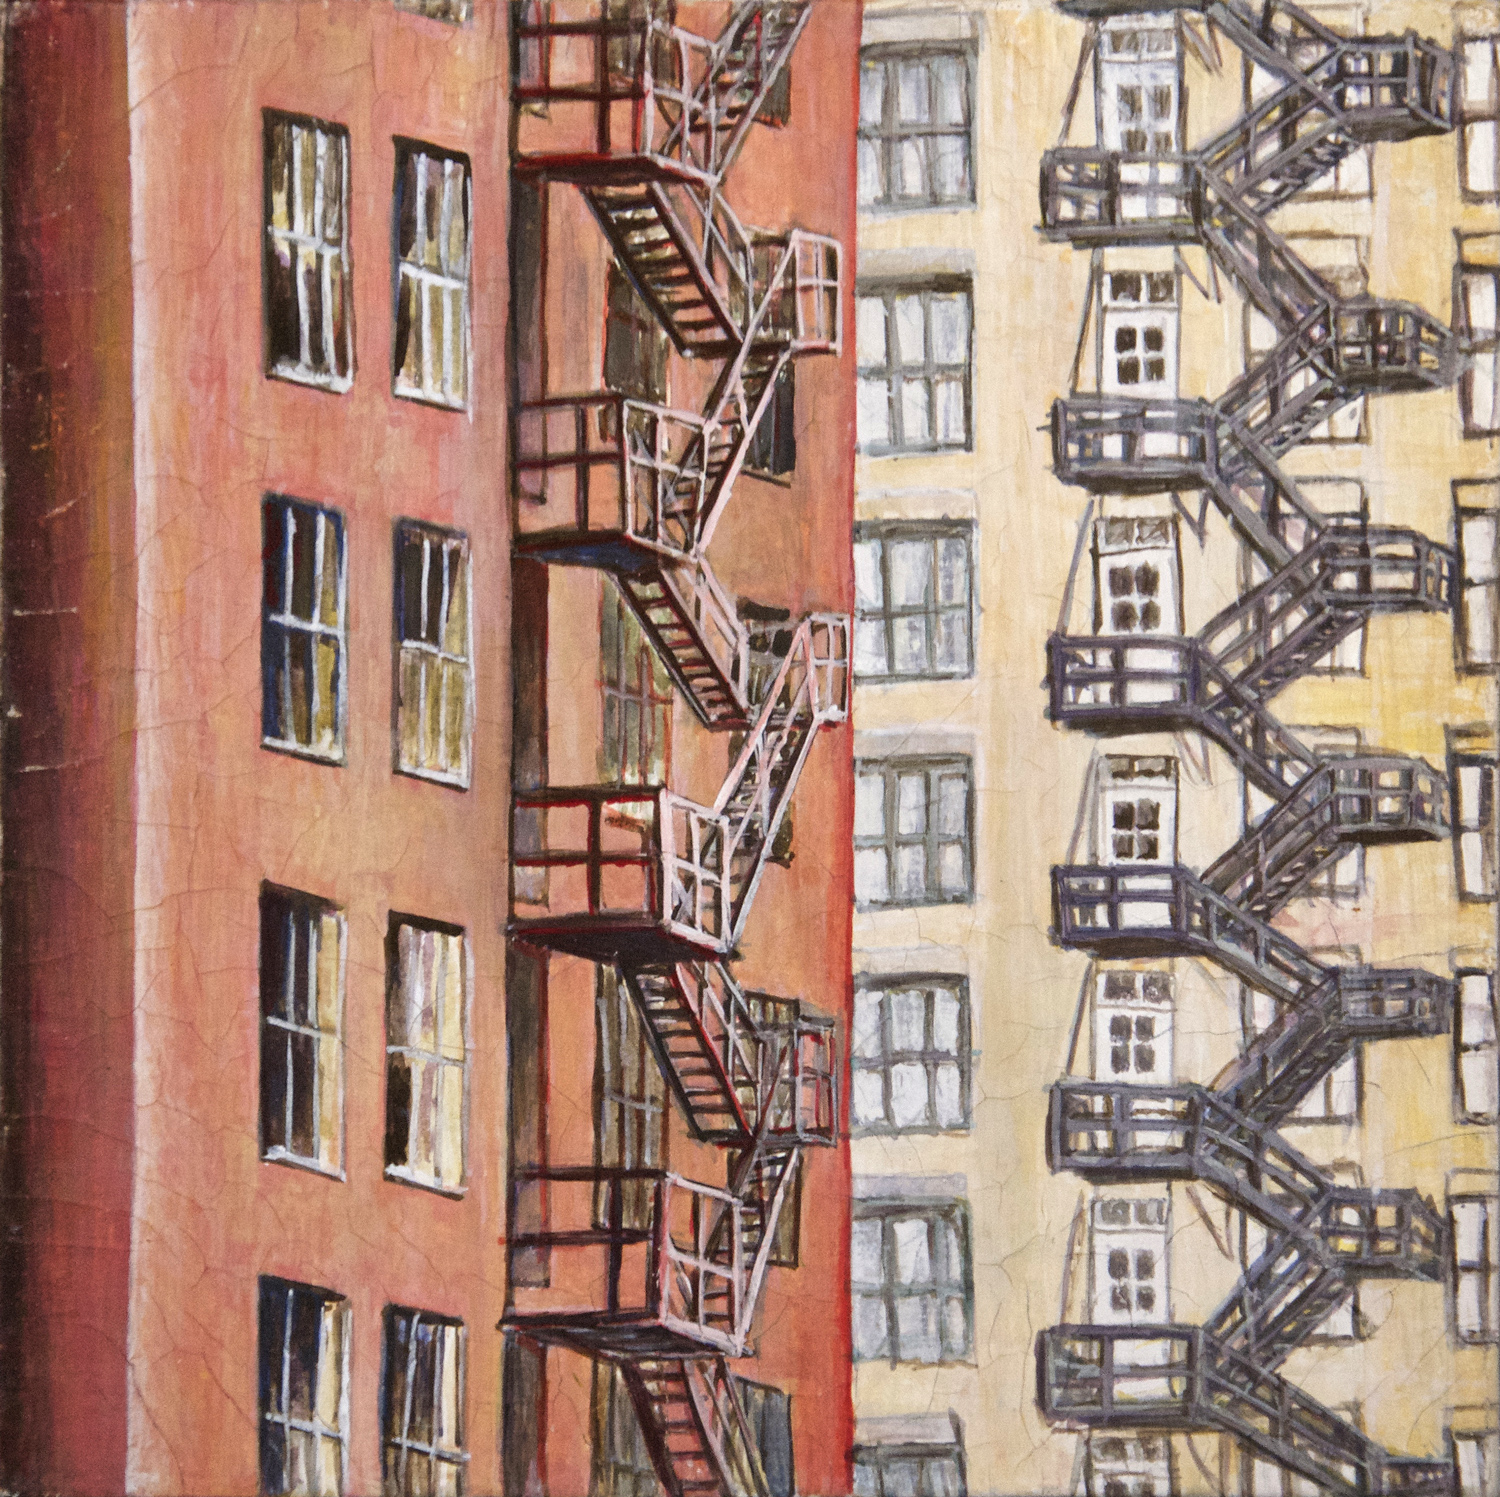 Red & Yellow Fire Escapes (Chicago) gouche painting, by Billy Reiter